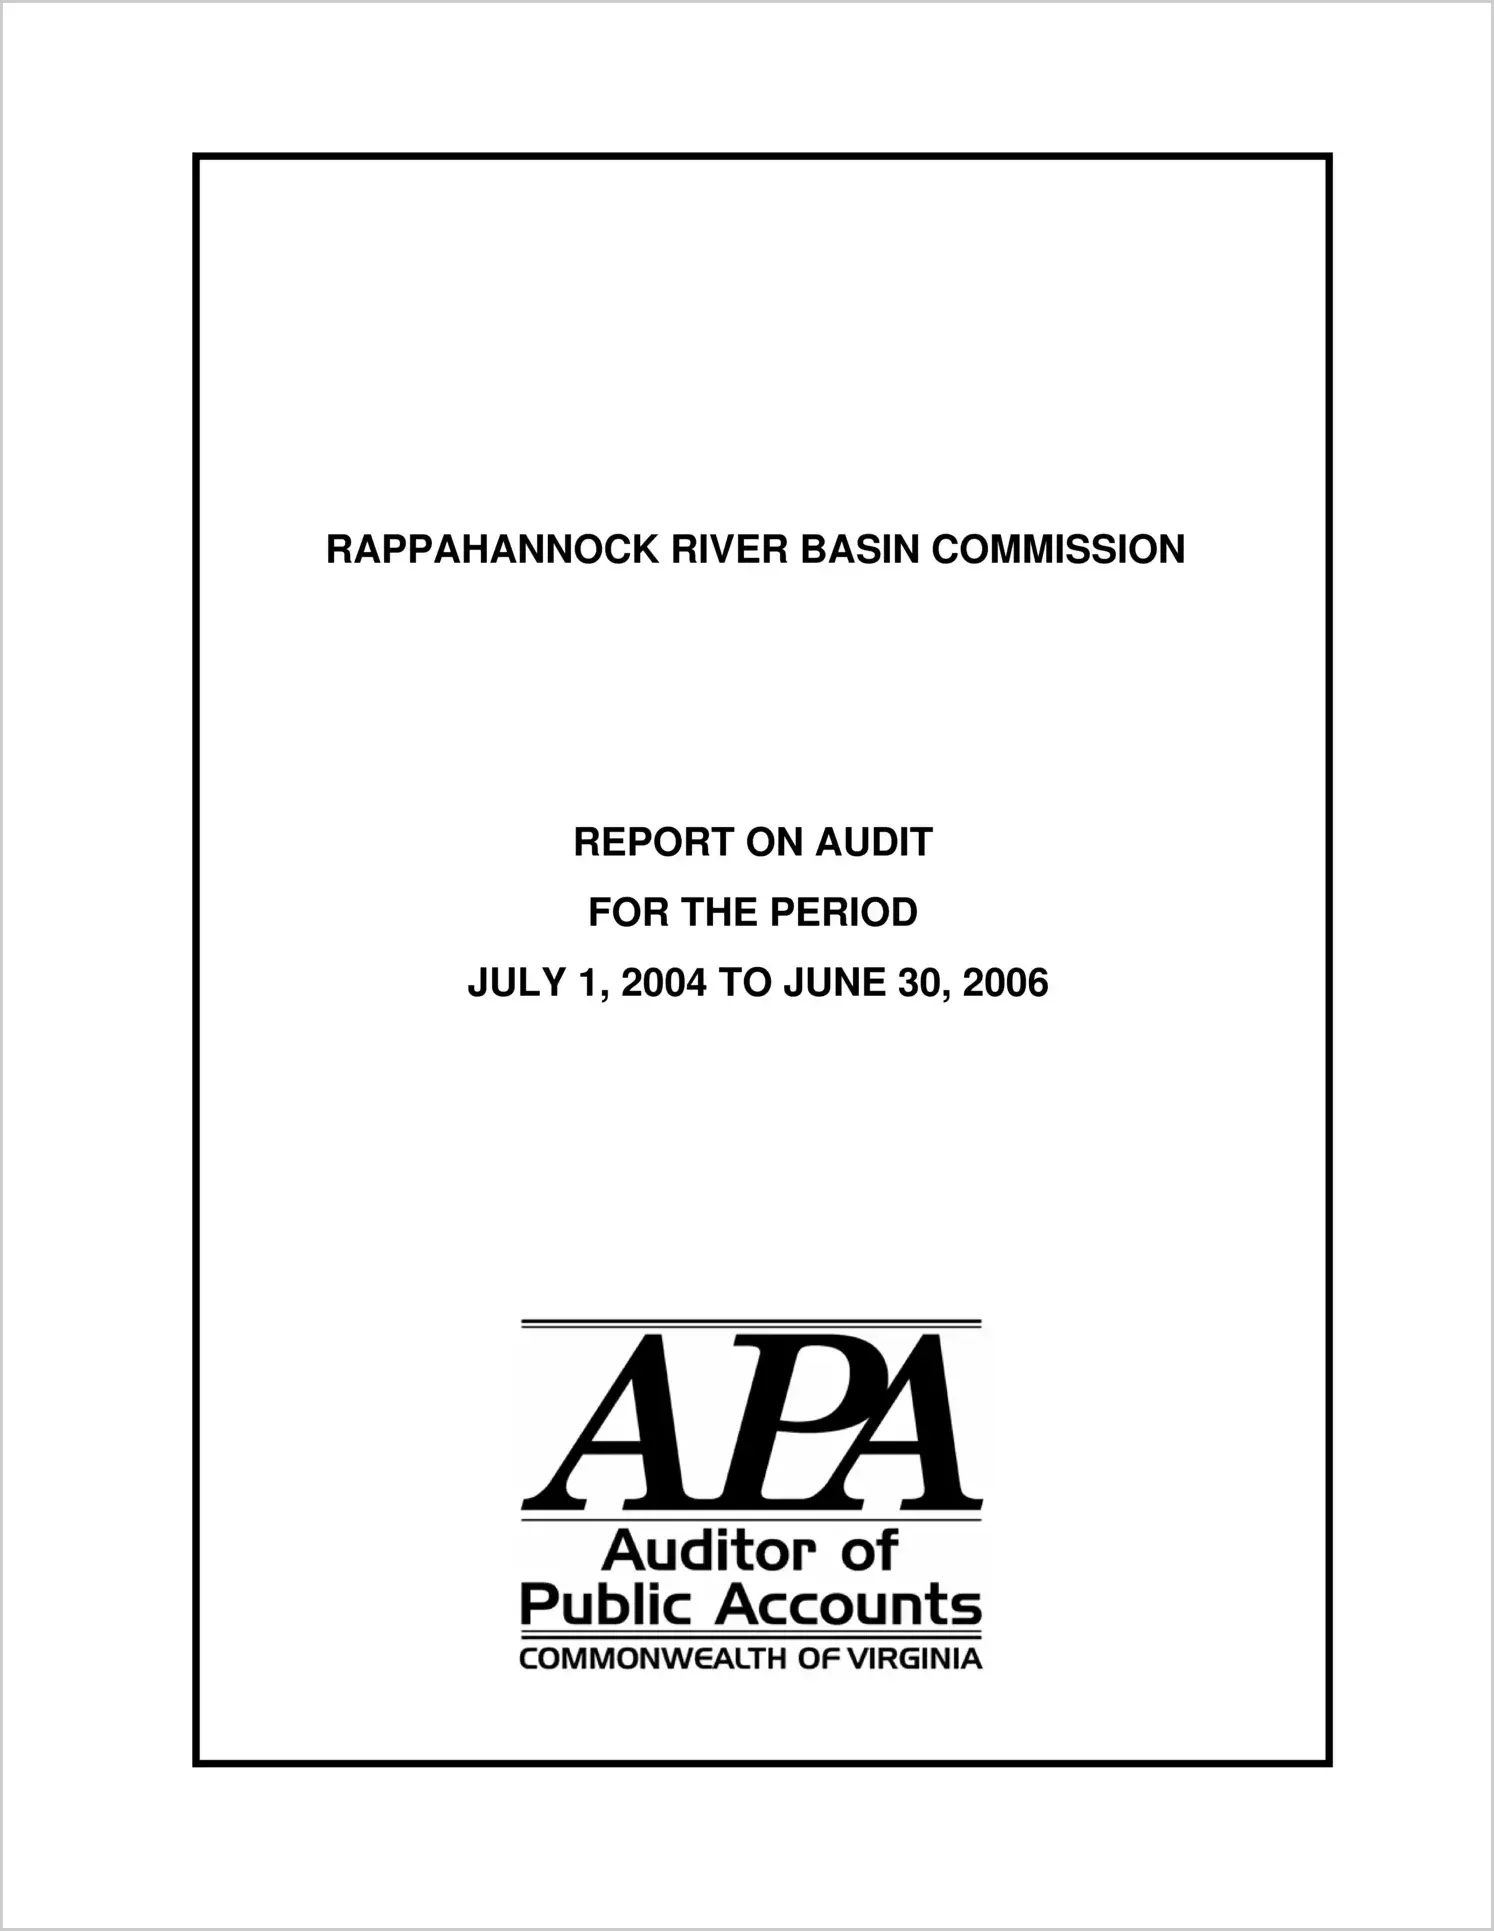 Rappahannock River Basin Commission for the period July 1, 2005 to June 30, 2006